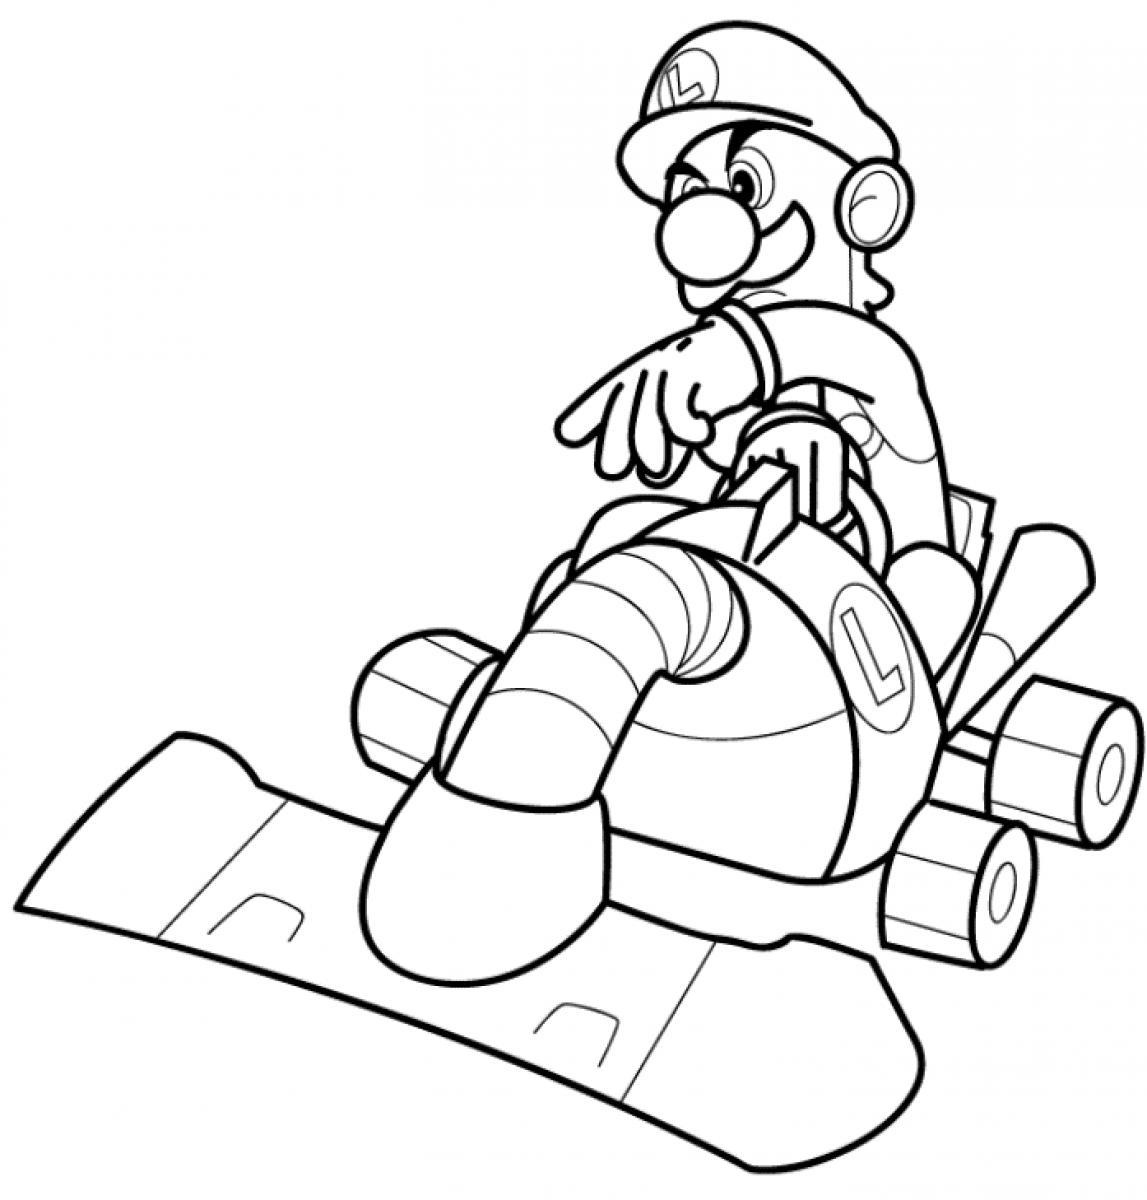 free-printable-luigi-coloring-pages-for-kids